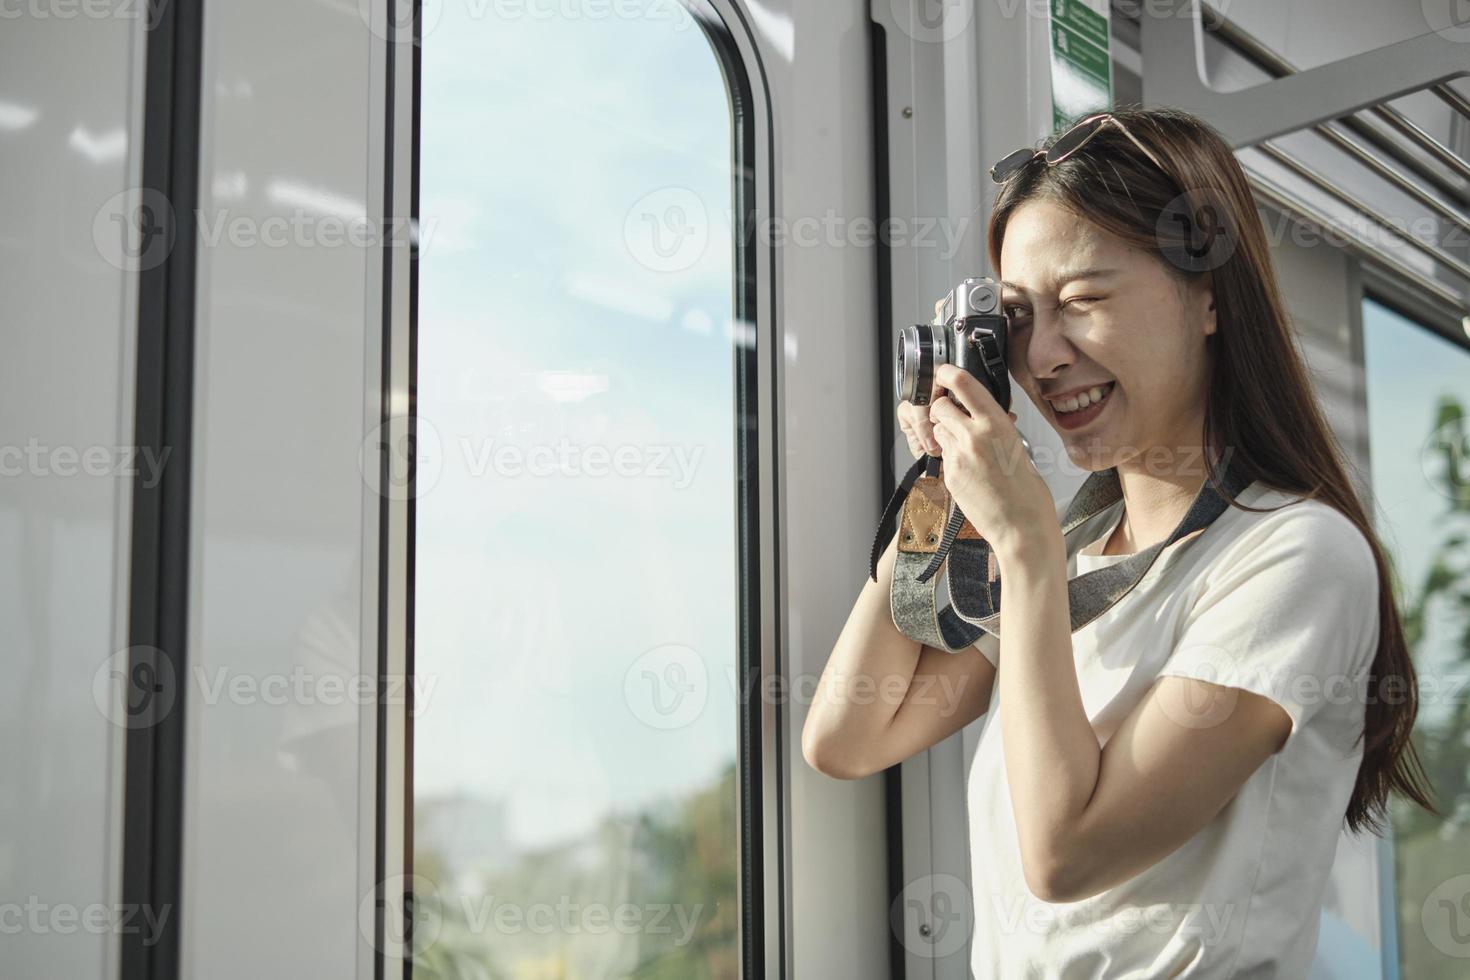 A Beautiful Asian female tourist with camera in the passenger cabin, traveling by sky train, taking snapshot photos when transporting in urban view, city lifestyle by railway, happy journey vacation.